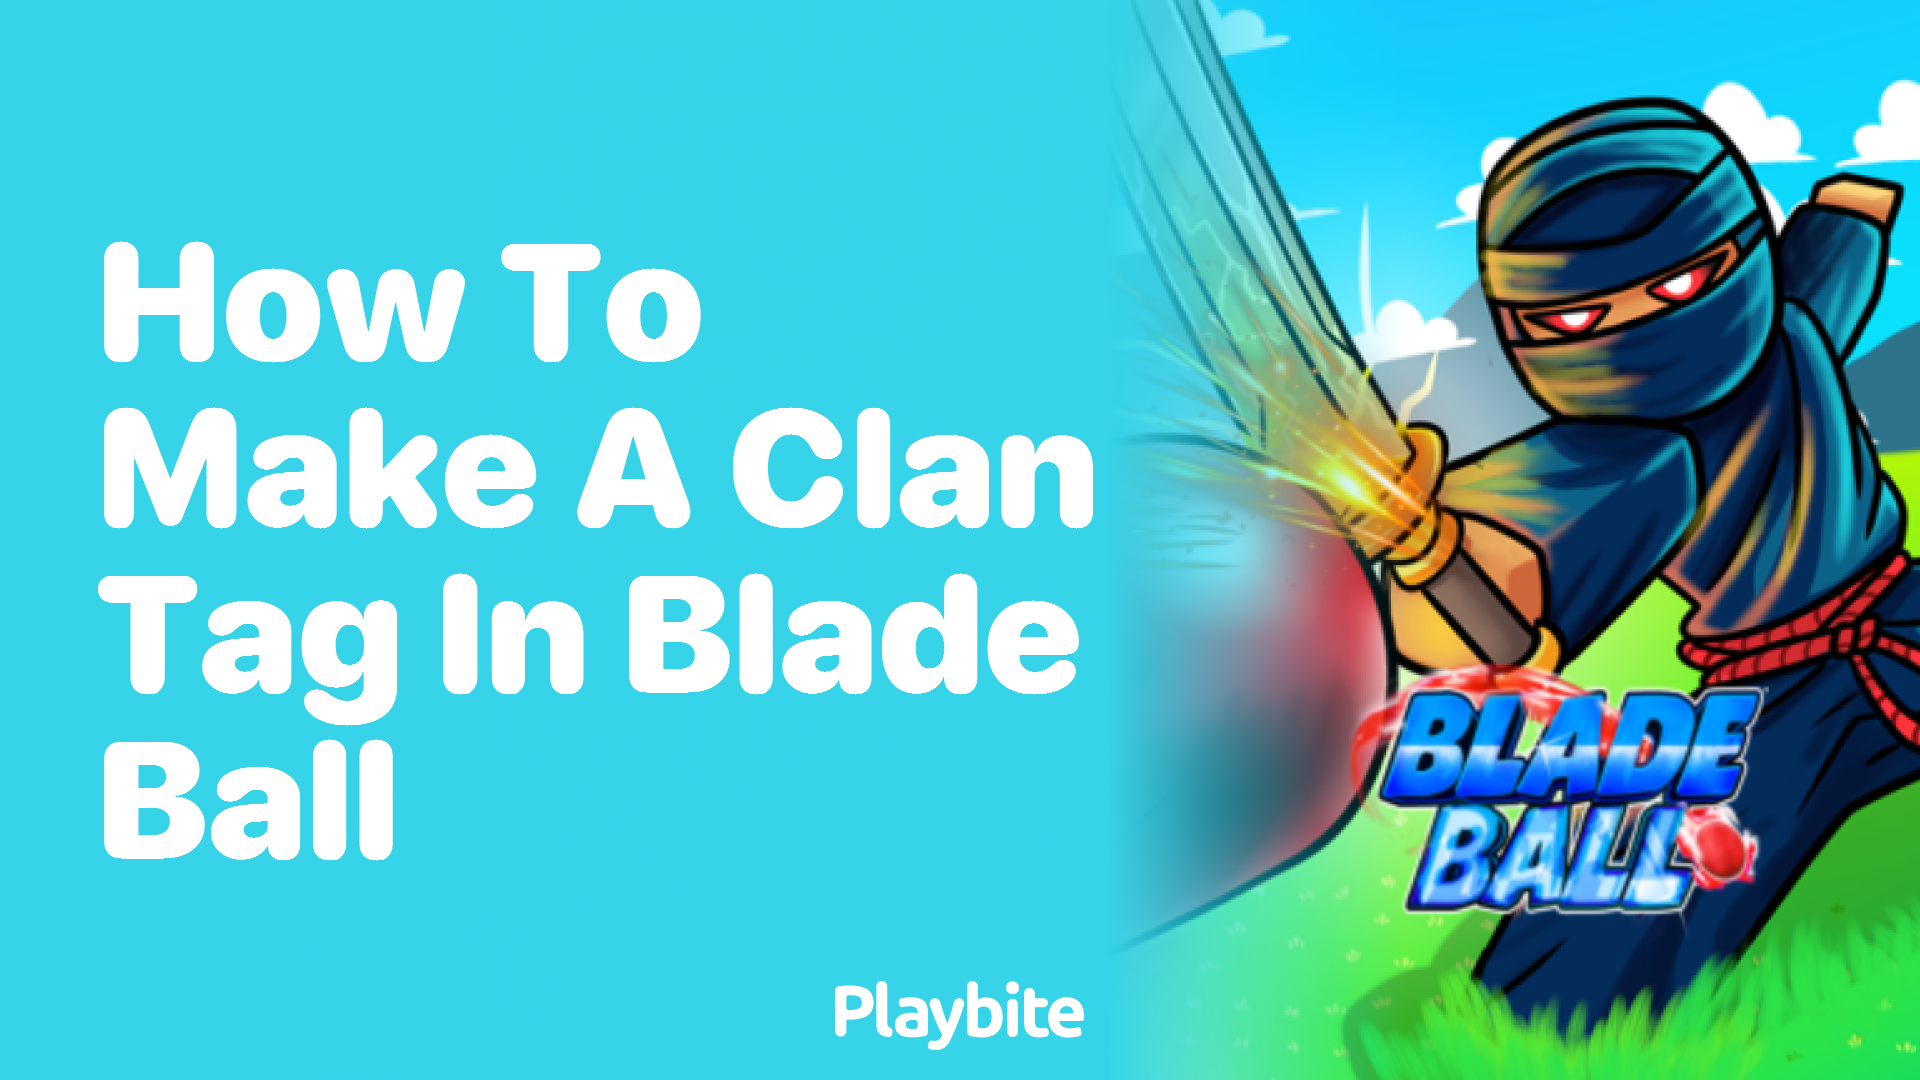 How to Make a Clan Tag in Blade Ball